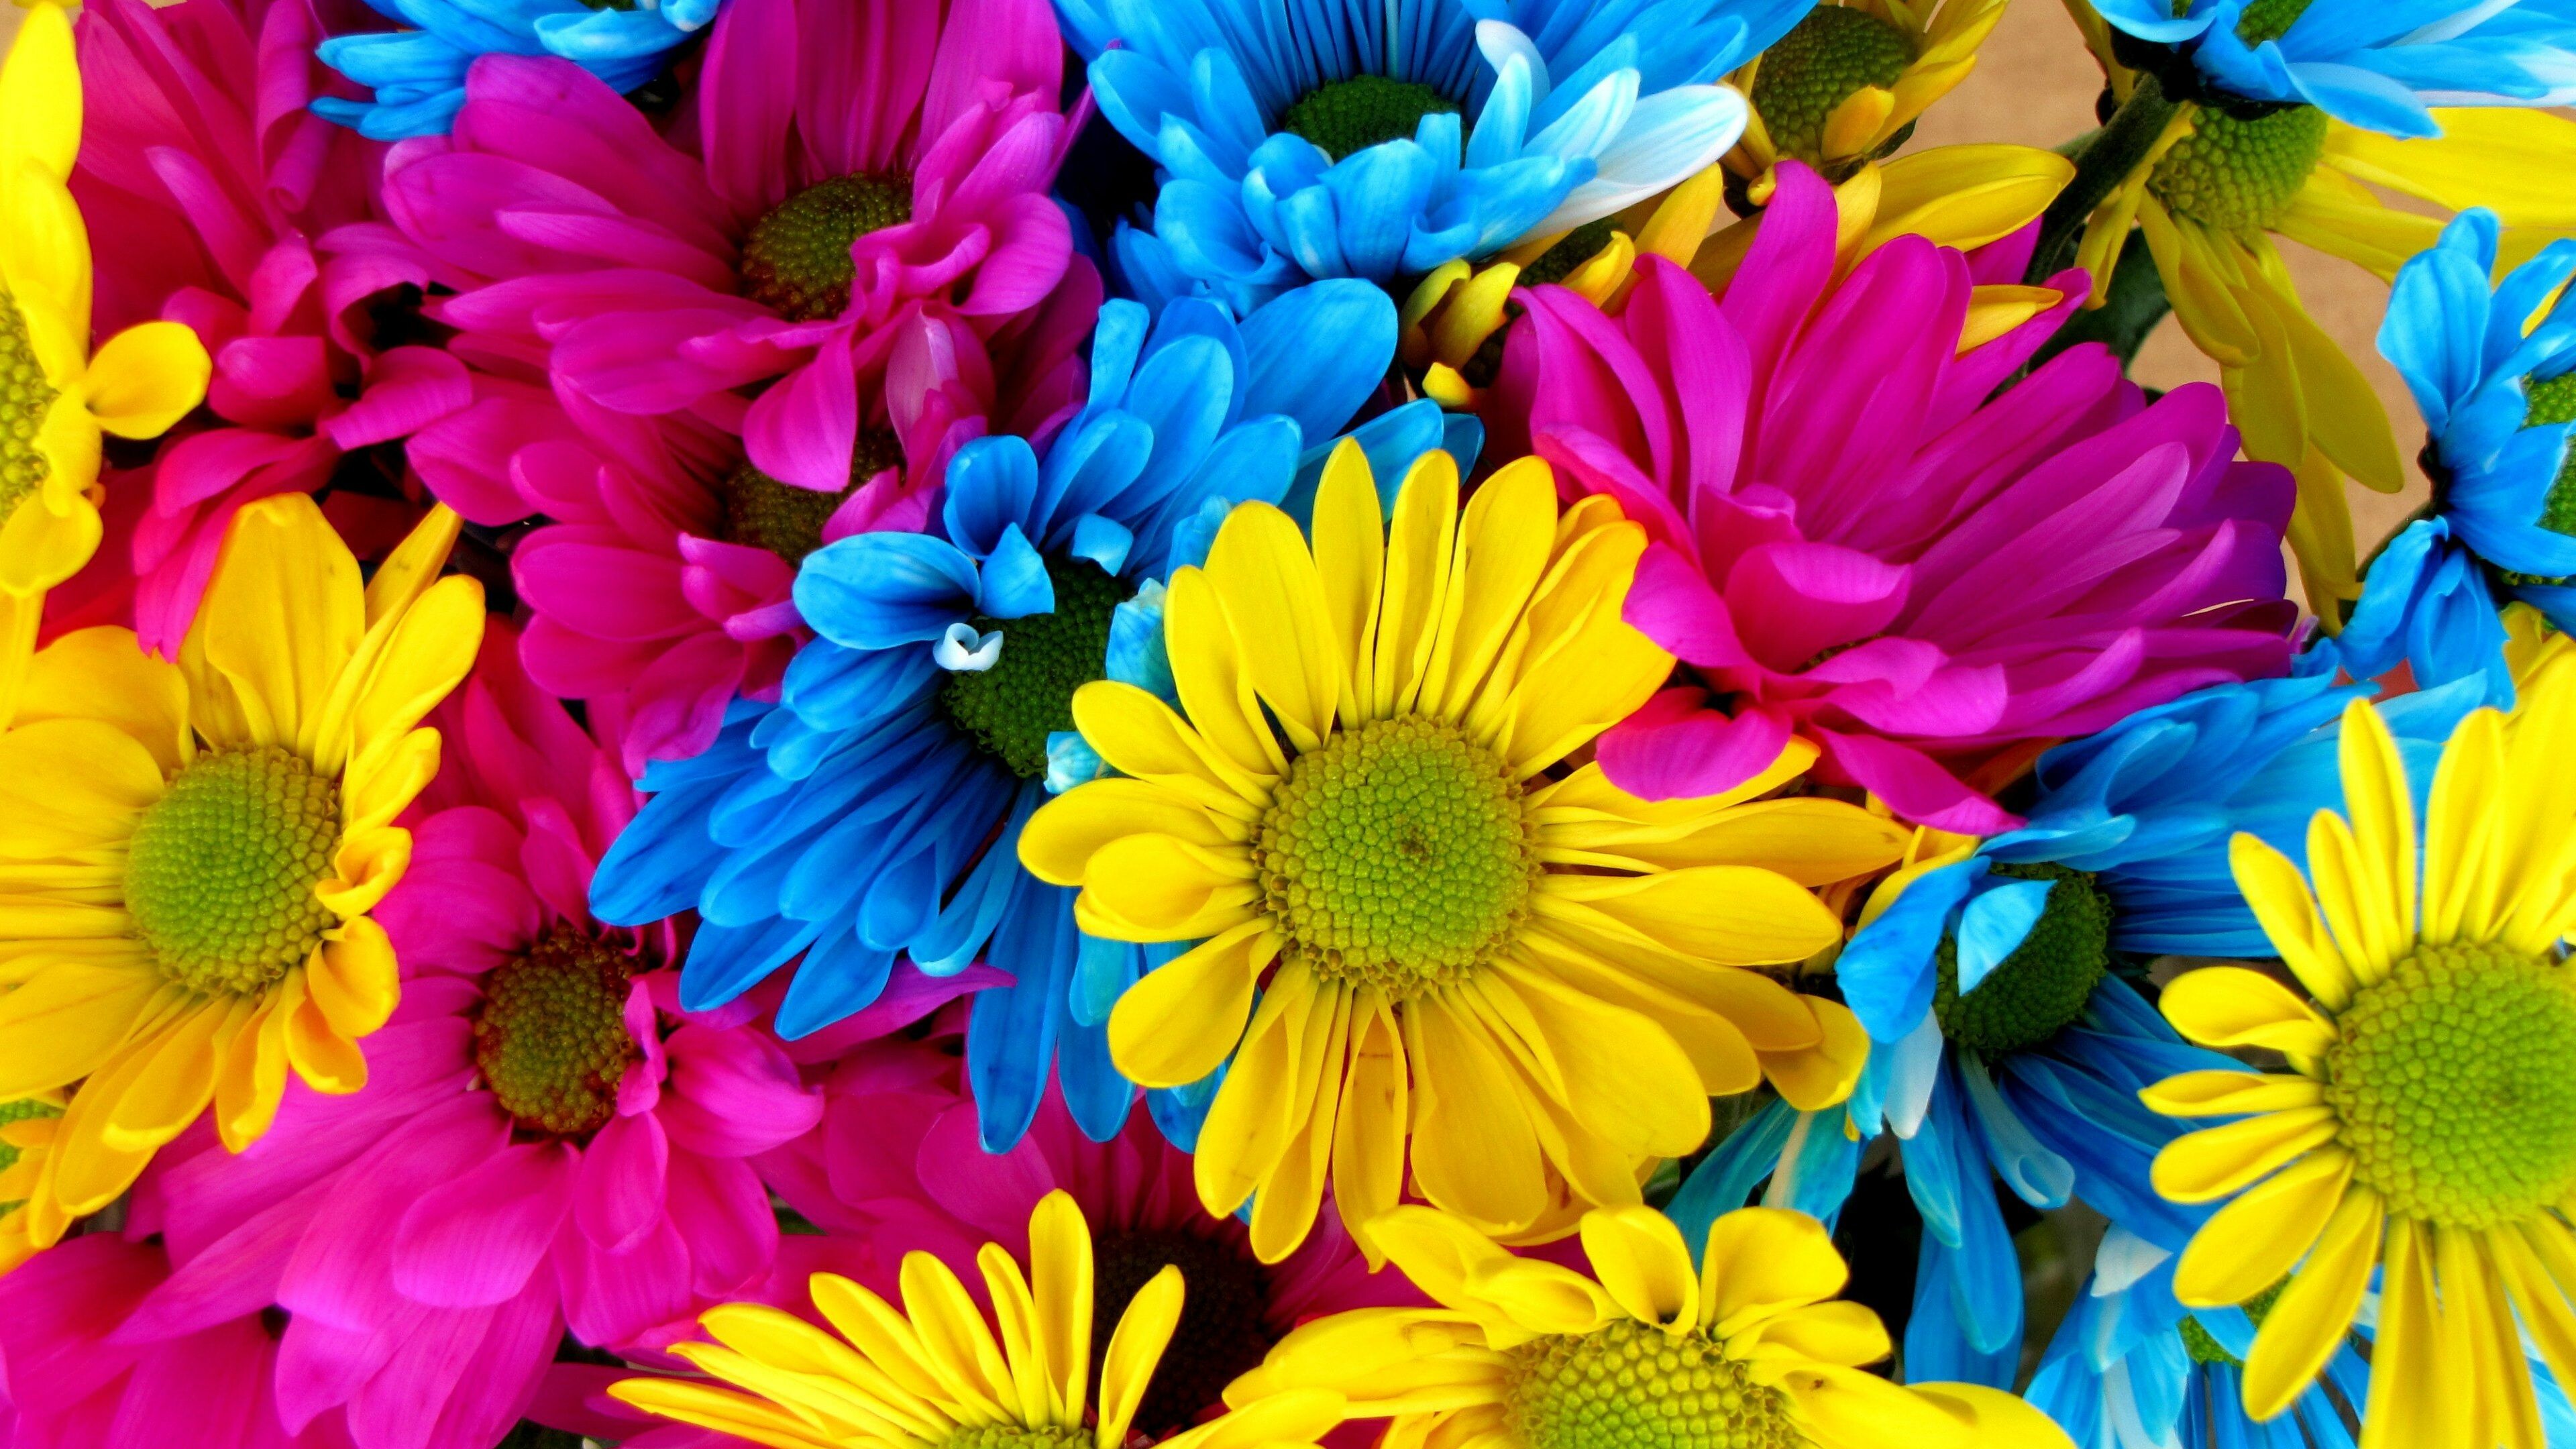 Daisy: A European species of the family Asteraceae, Colorfulness, Flower. 3840x2160 4K Background.